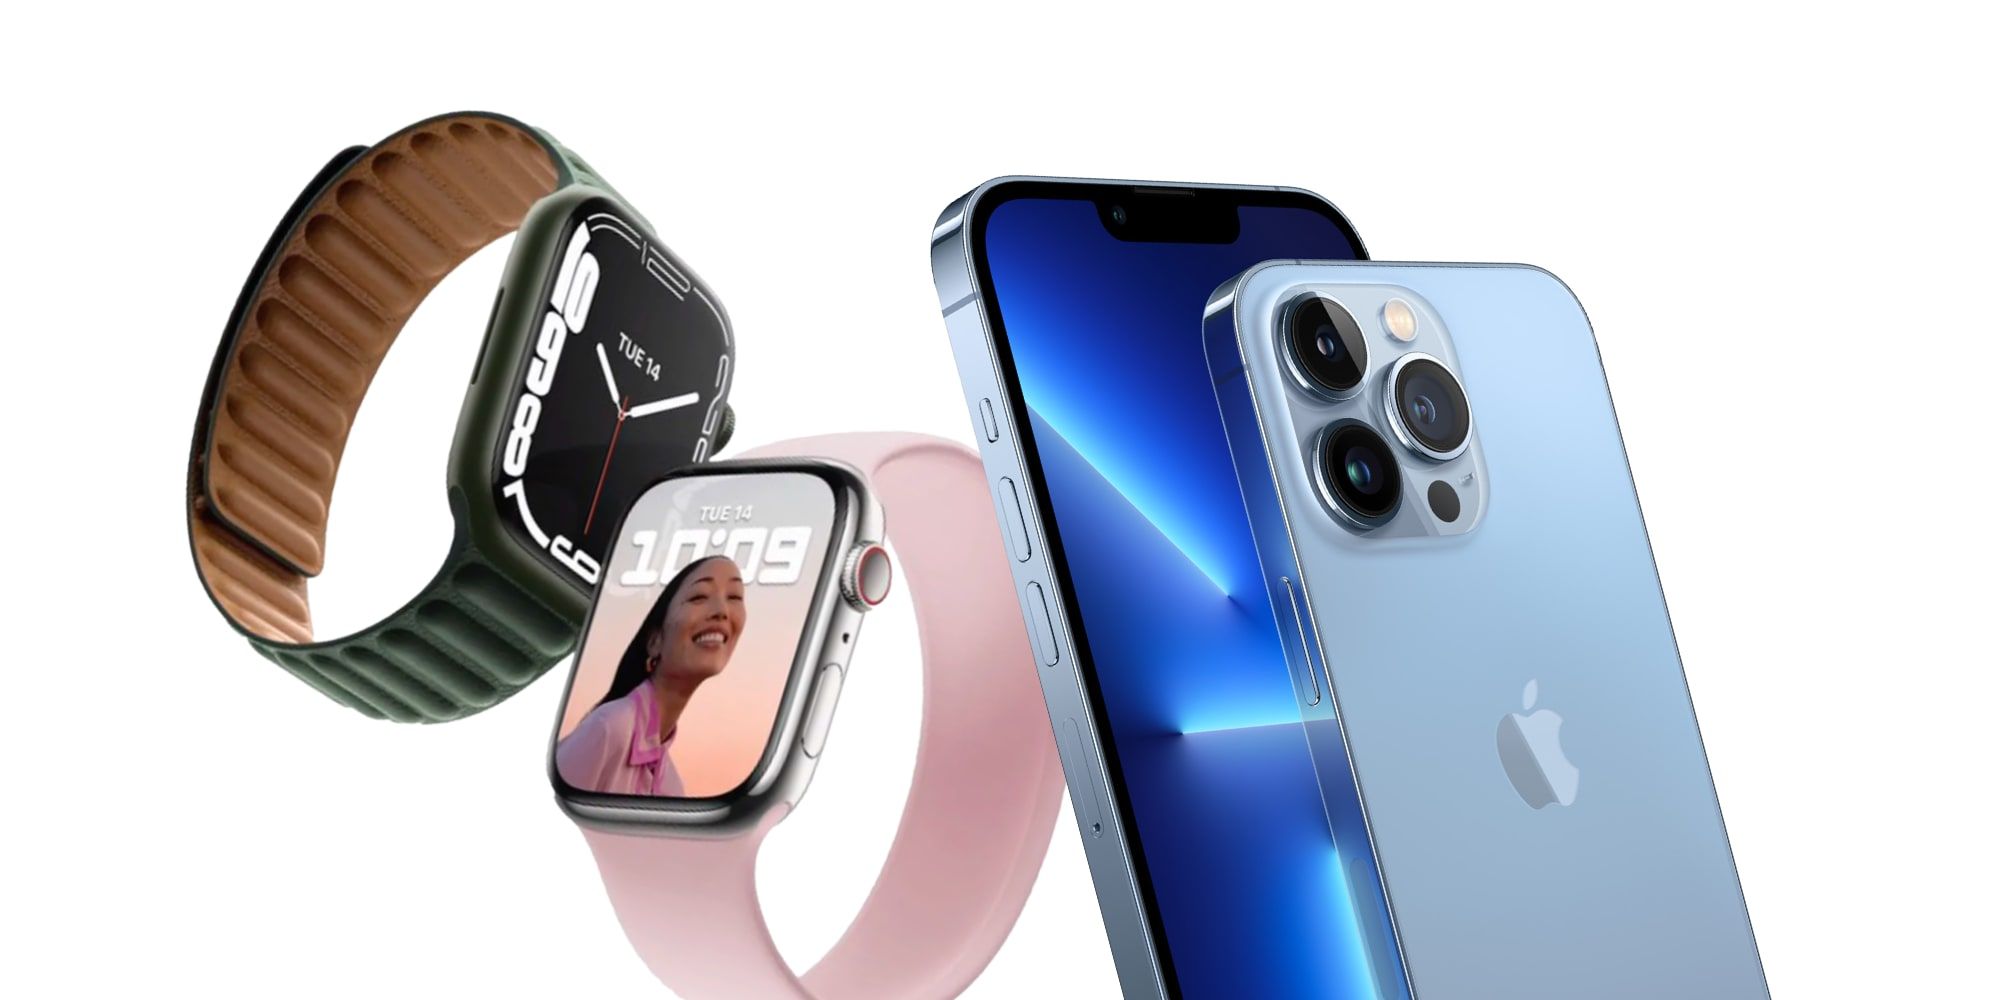 Apple Watch Series 7 And iPhone 13 Pro